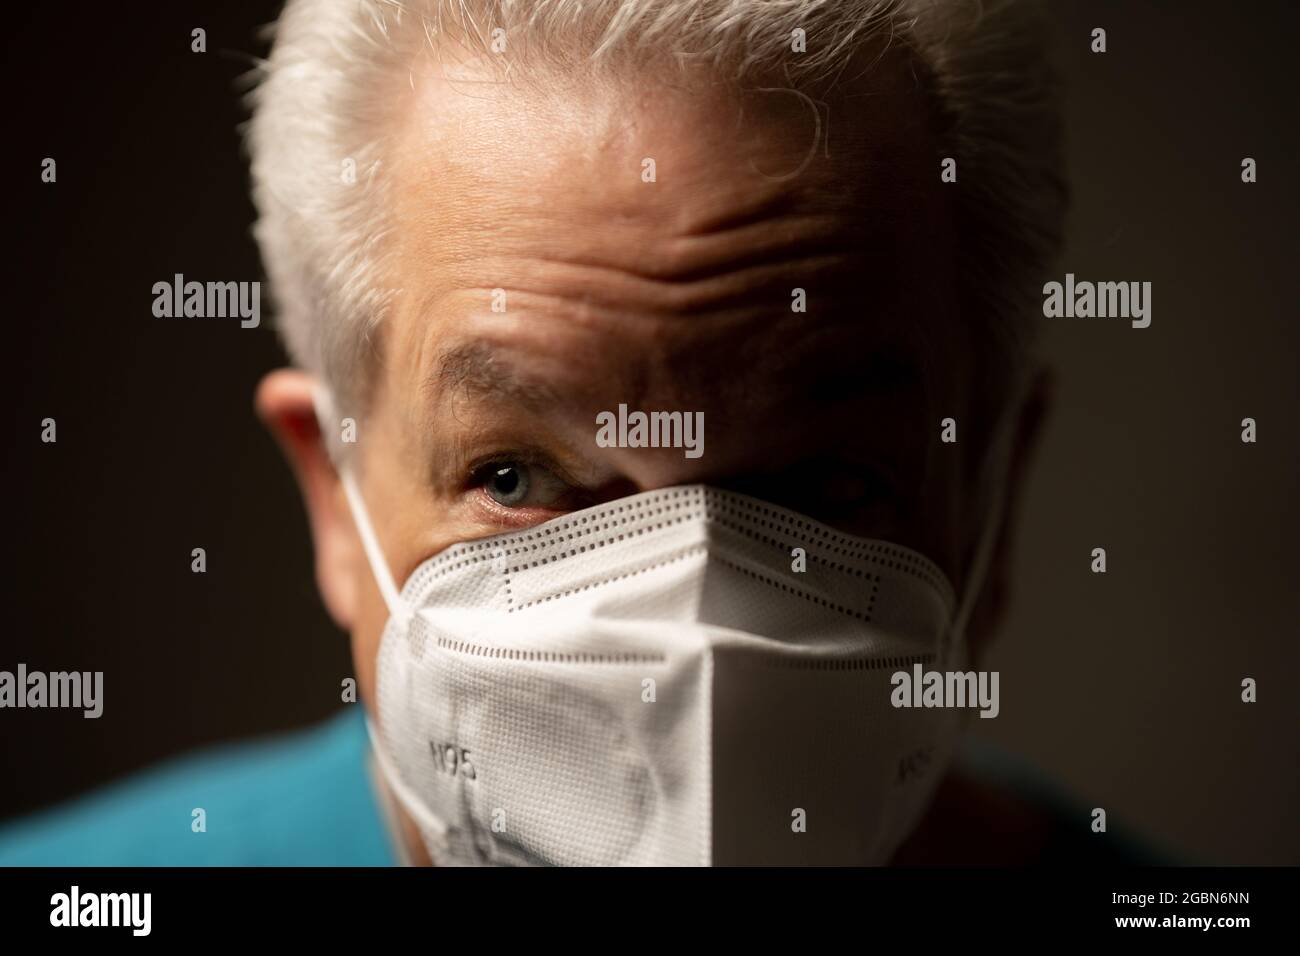 Side light photo of an old man wearing a face mask Stock Photo